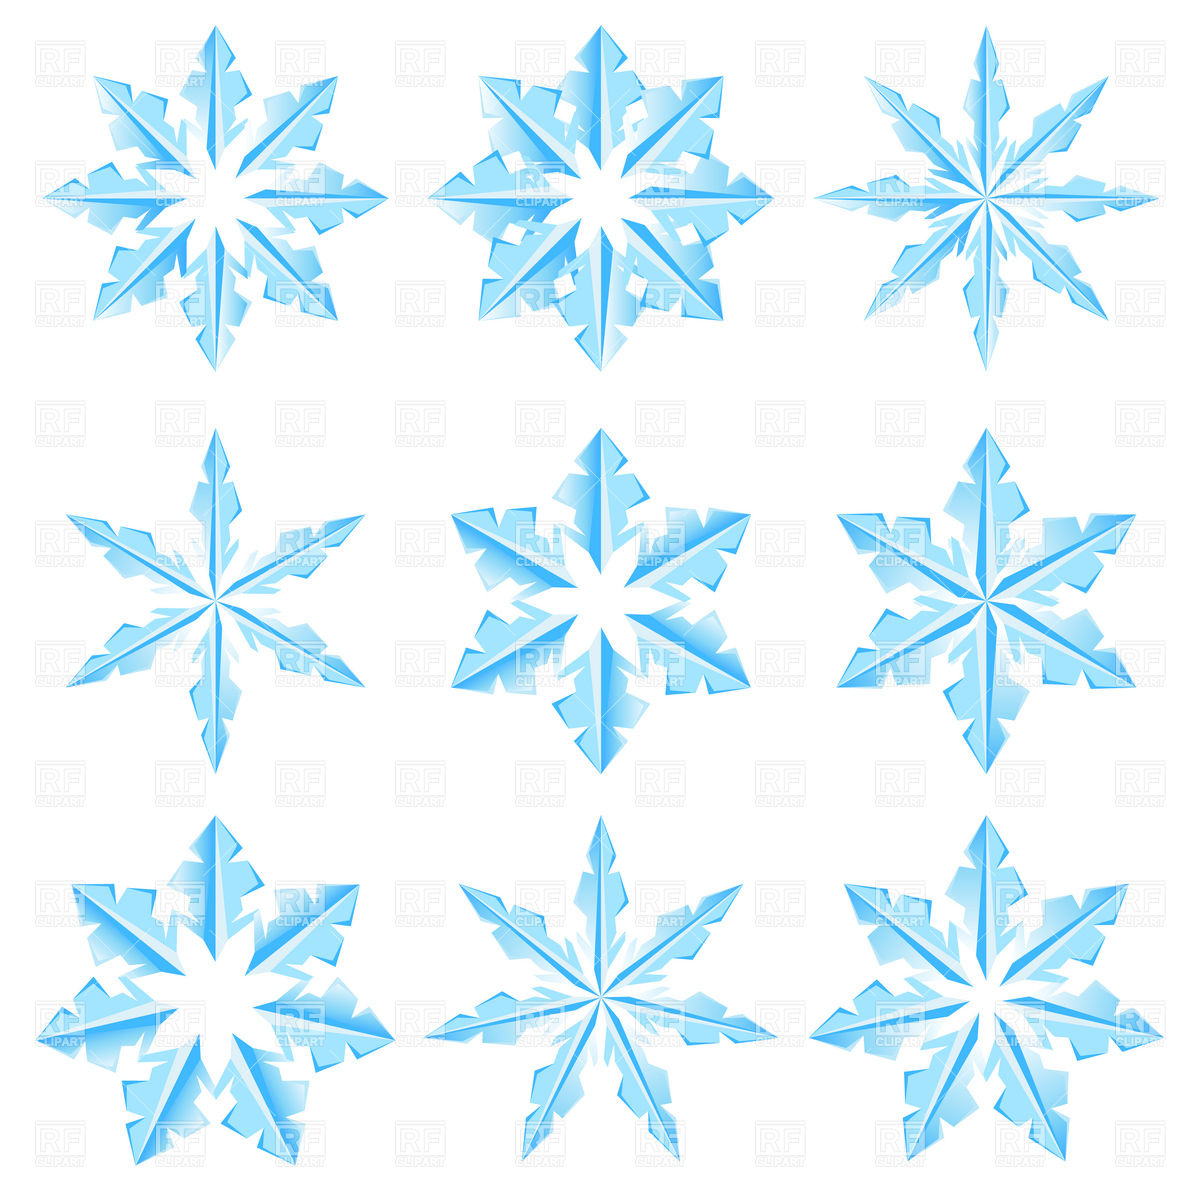 Icy Snowflake Designs Download Royalty Free Vector Clipart  Eps